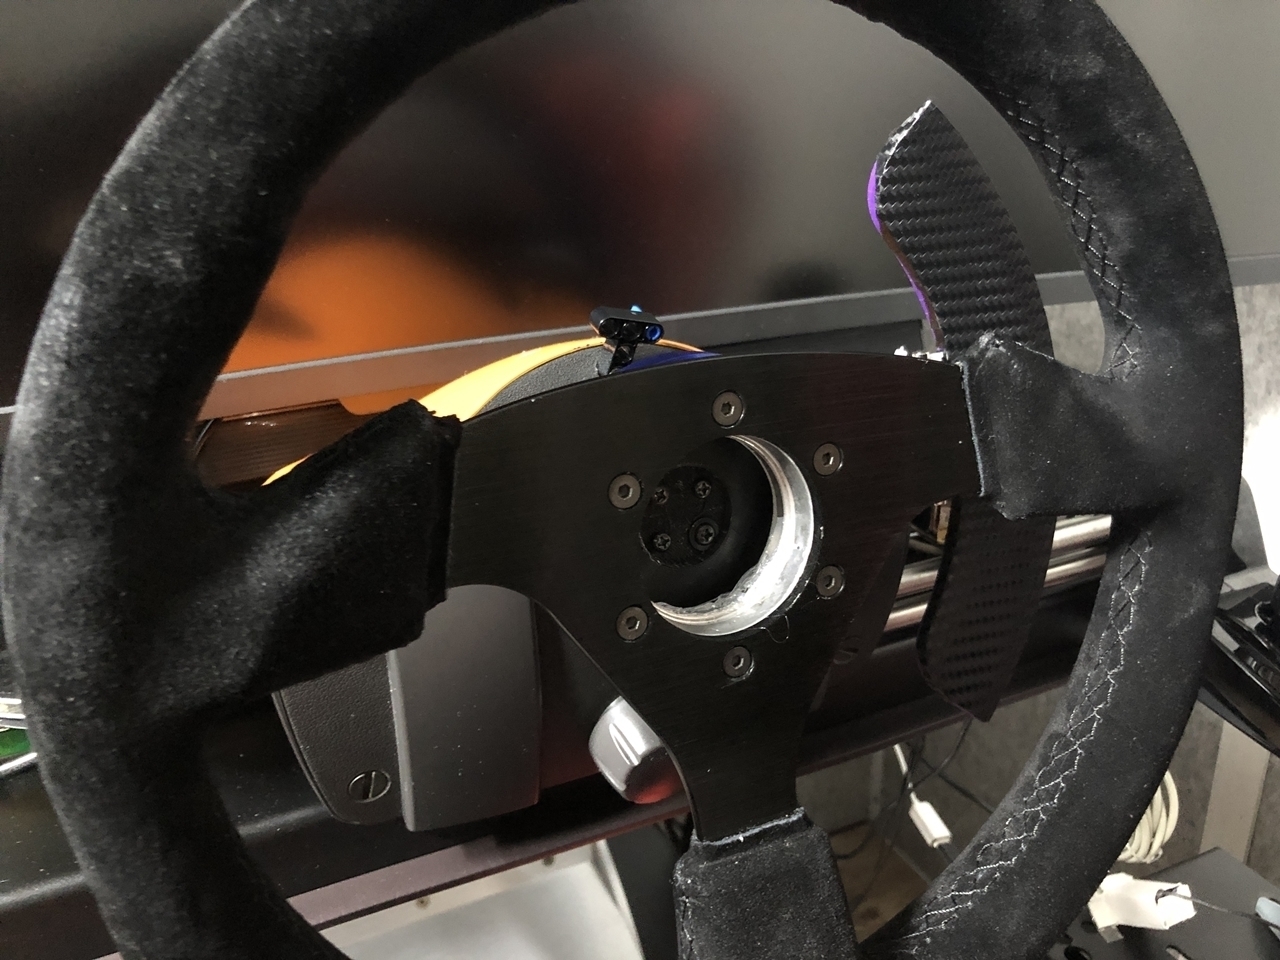 3d Printed Wheel Adapter For Fanatec Porsche 911 Gt3 Rs V2 Racing Wheel By Leza Dreamizer Pinshape